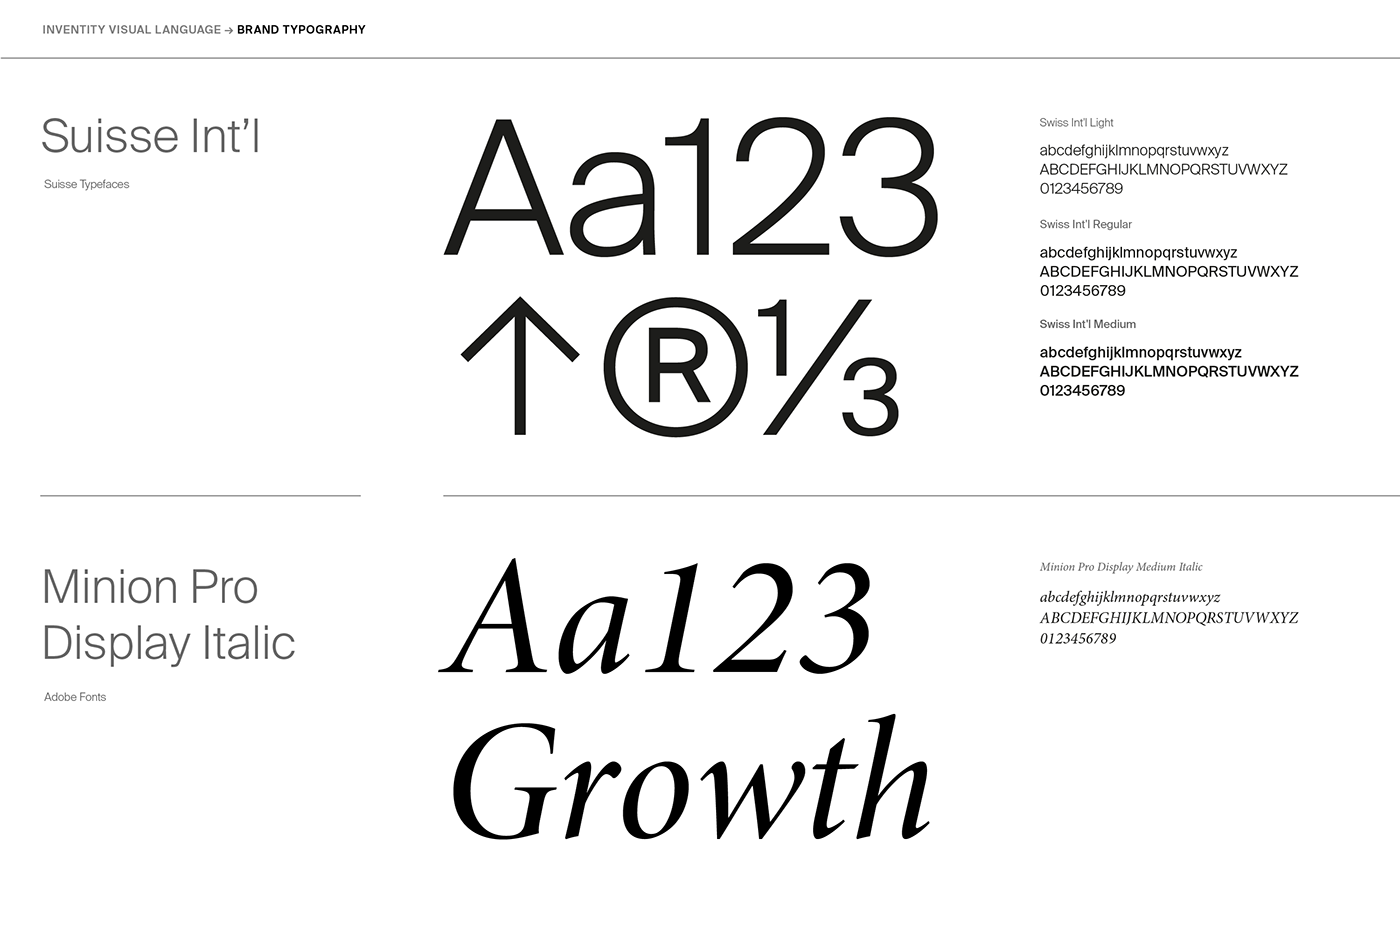 Artifact from the Inventity Foundation Branding: A Cohesive Visual Identity System article on Abduzeedo